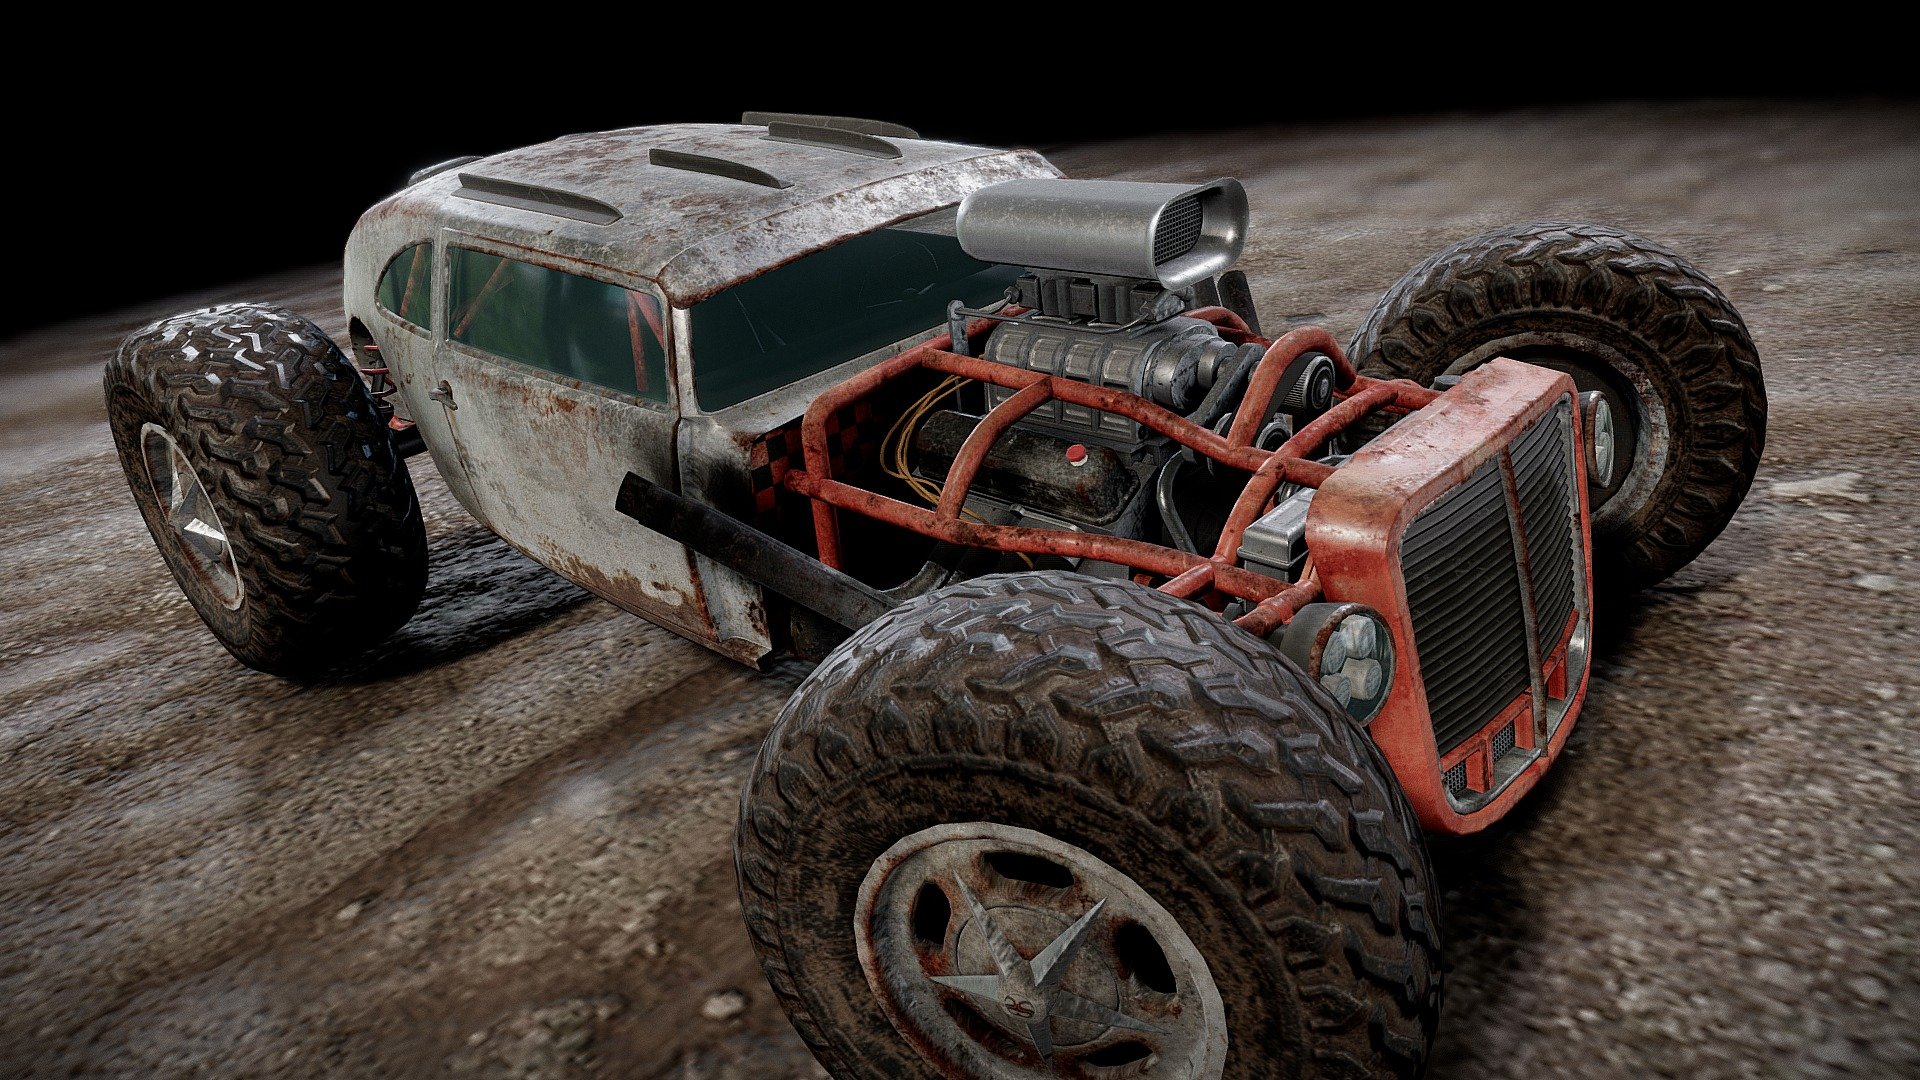 A fictional brand hot rod created for Asphalt Xtreme, here with the rat rod look! - "Lynx RAIDER" off-road hot rod - 3D model by ollitei 3d model